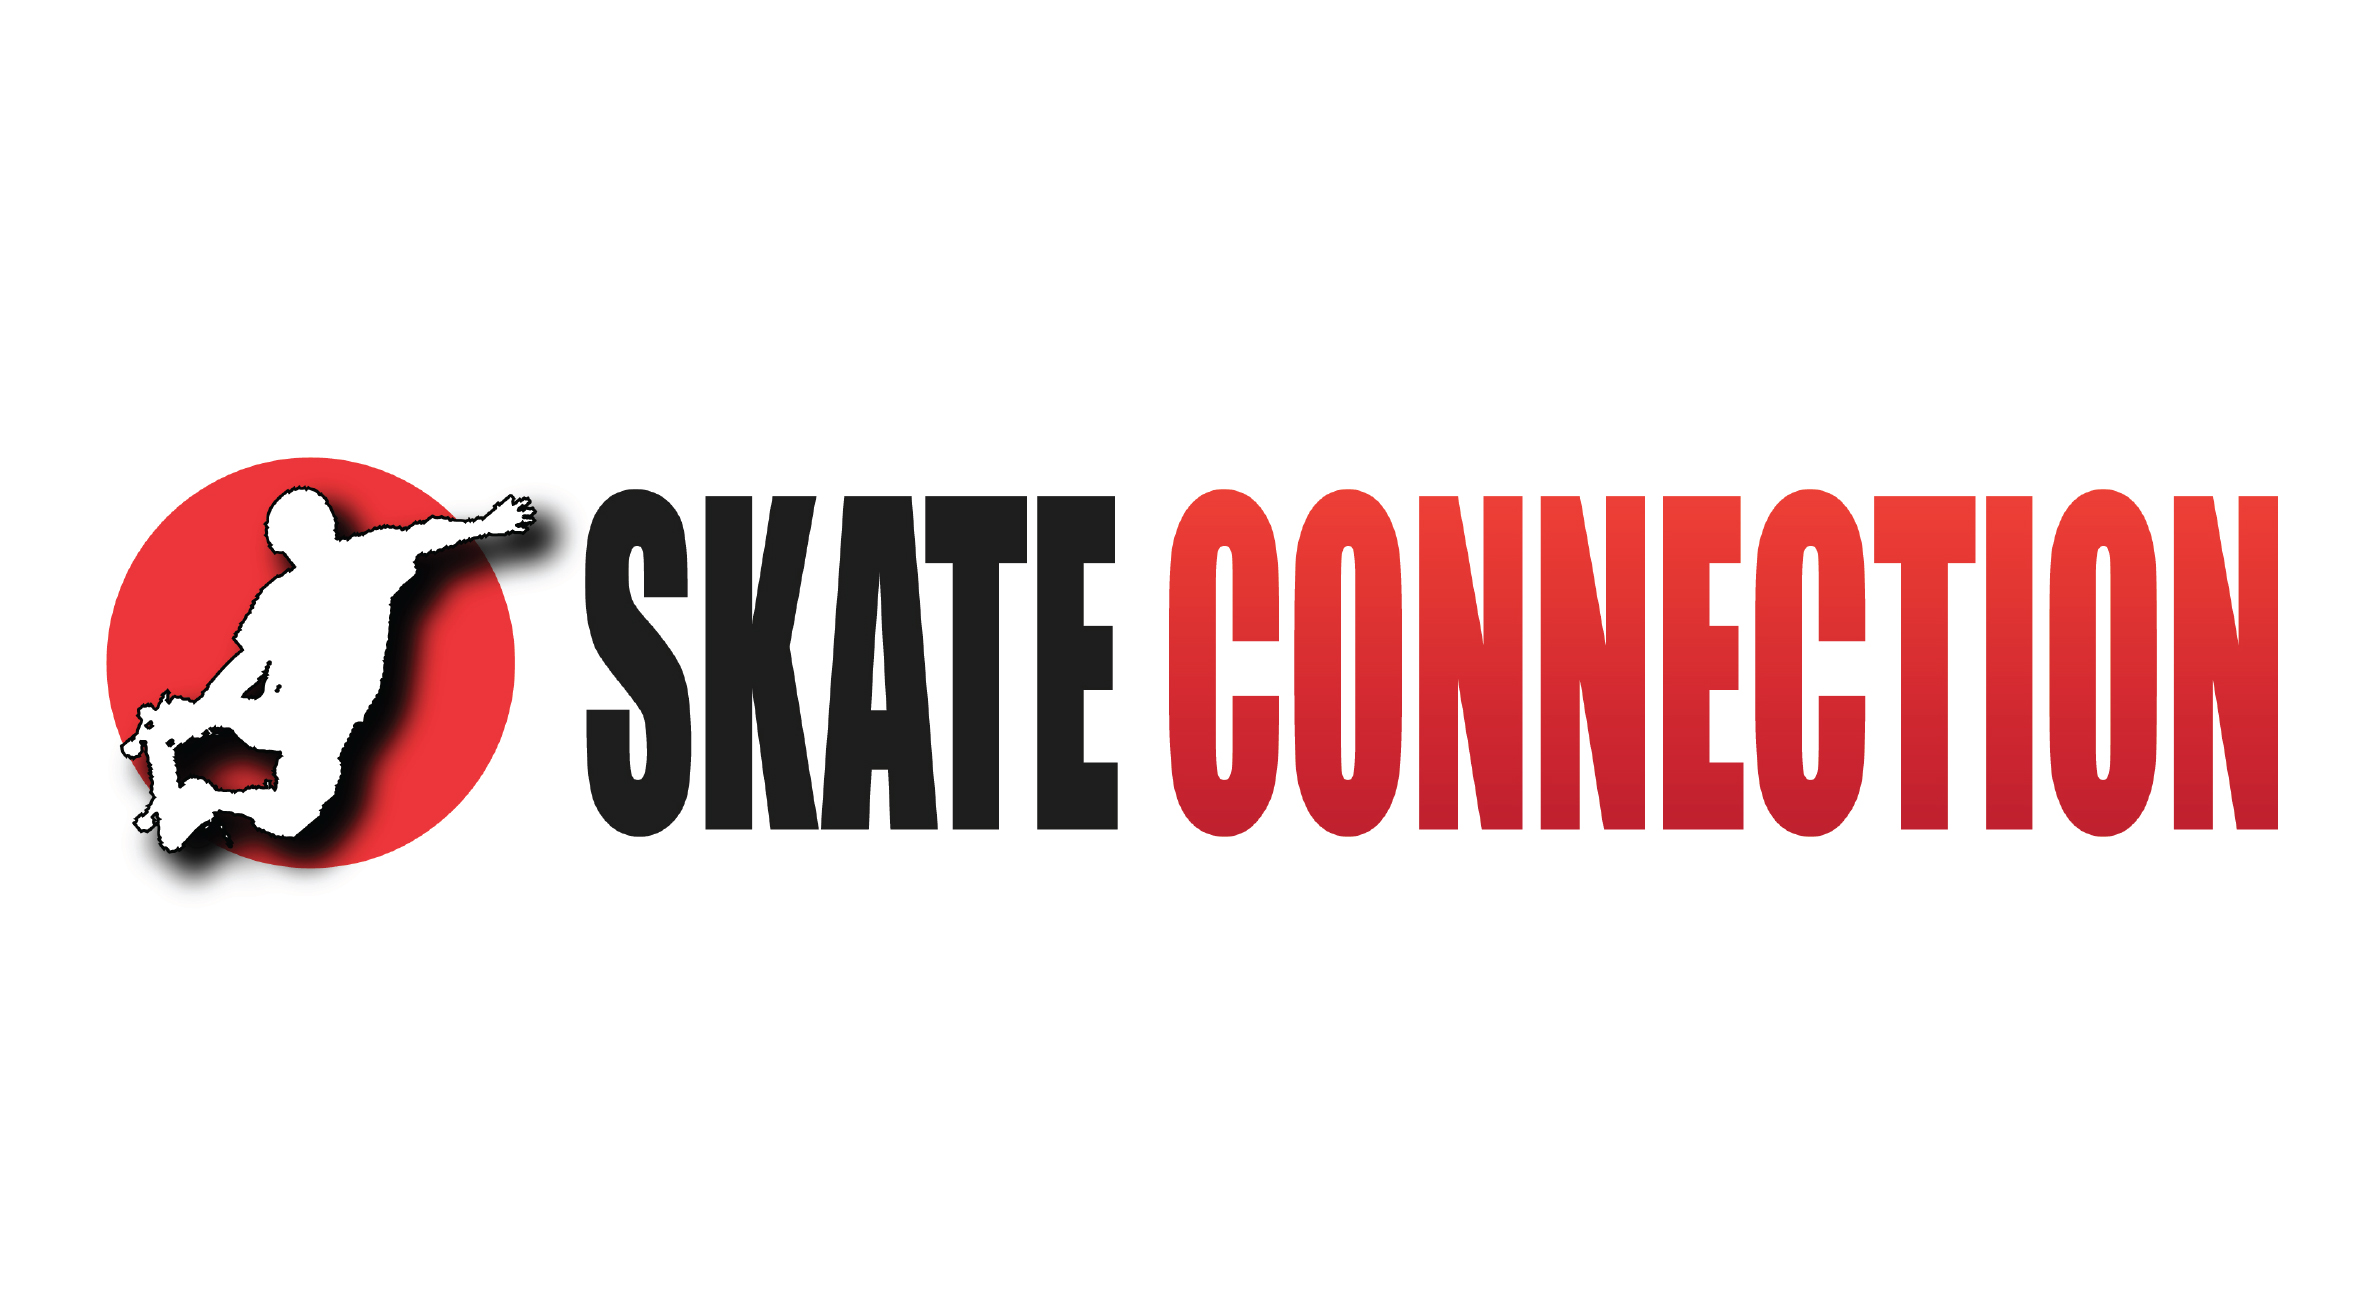 Skate Connection